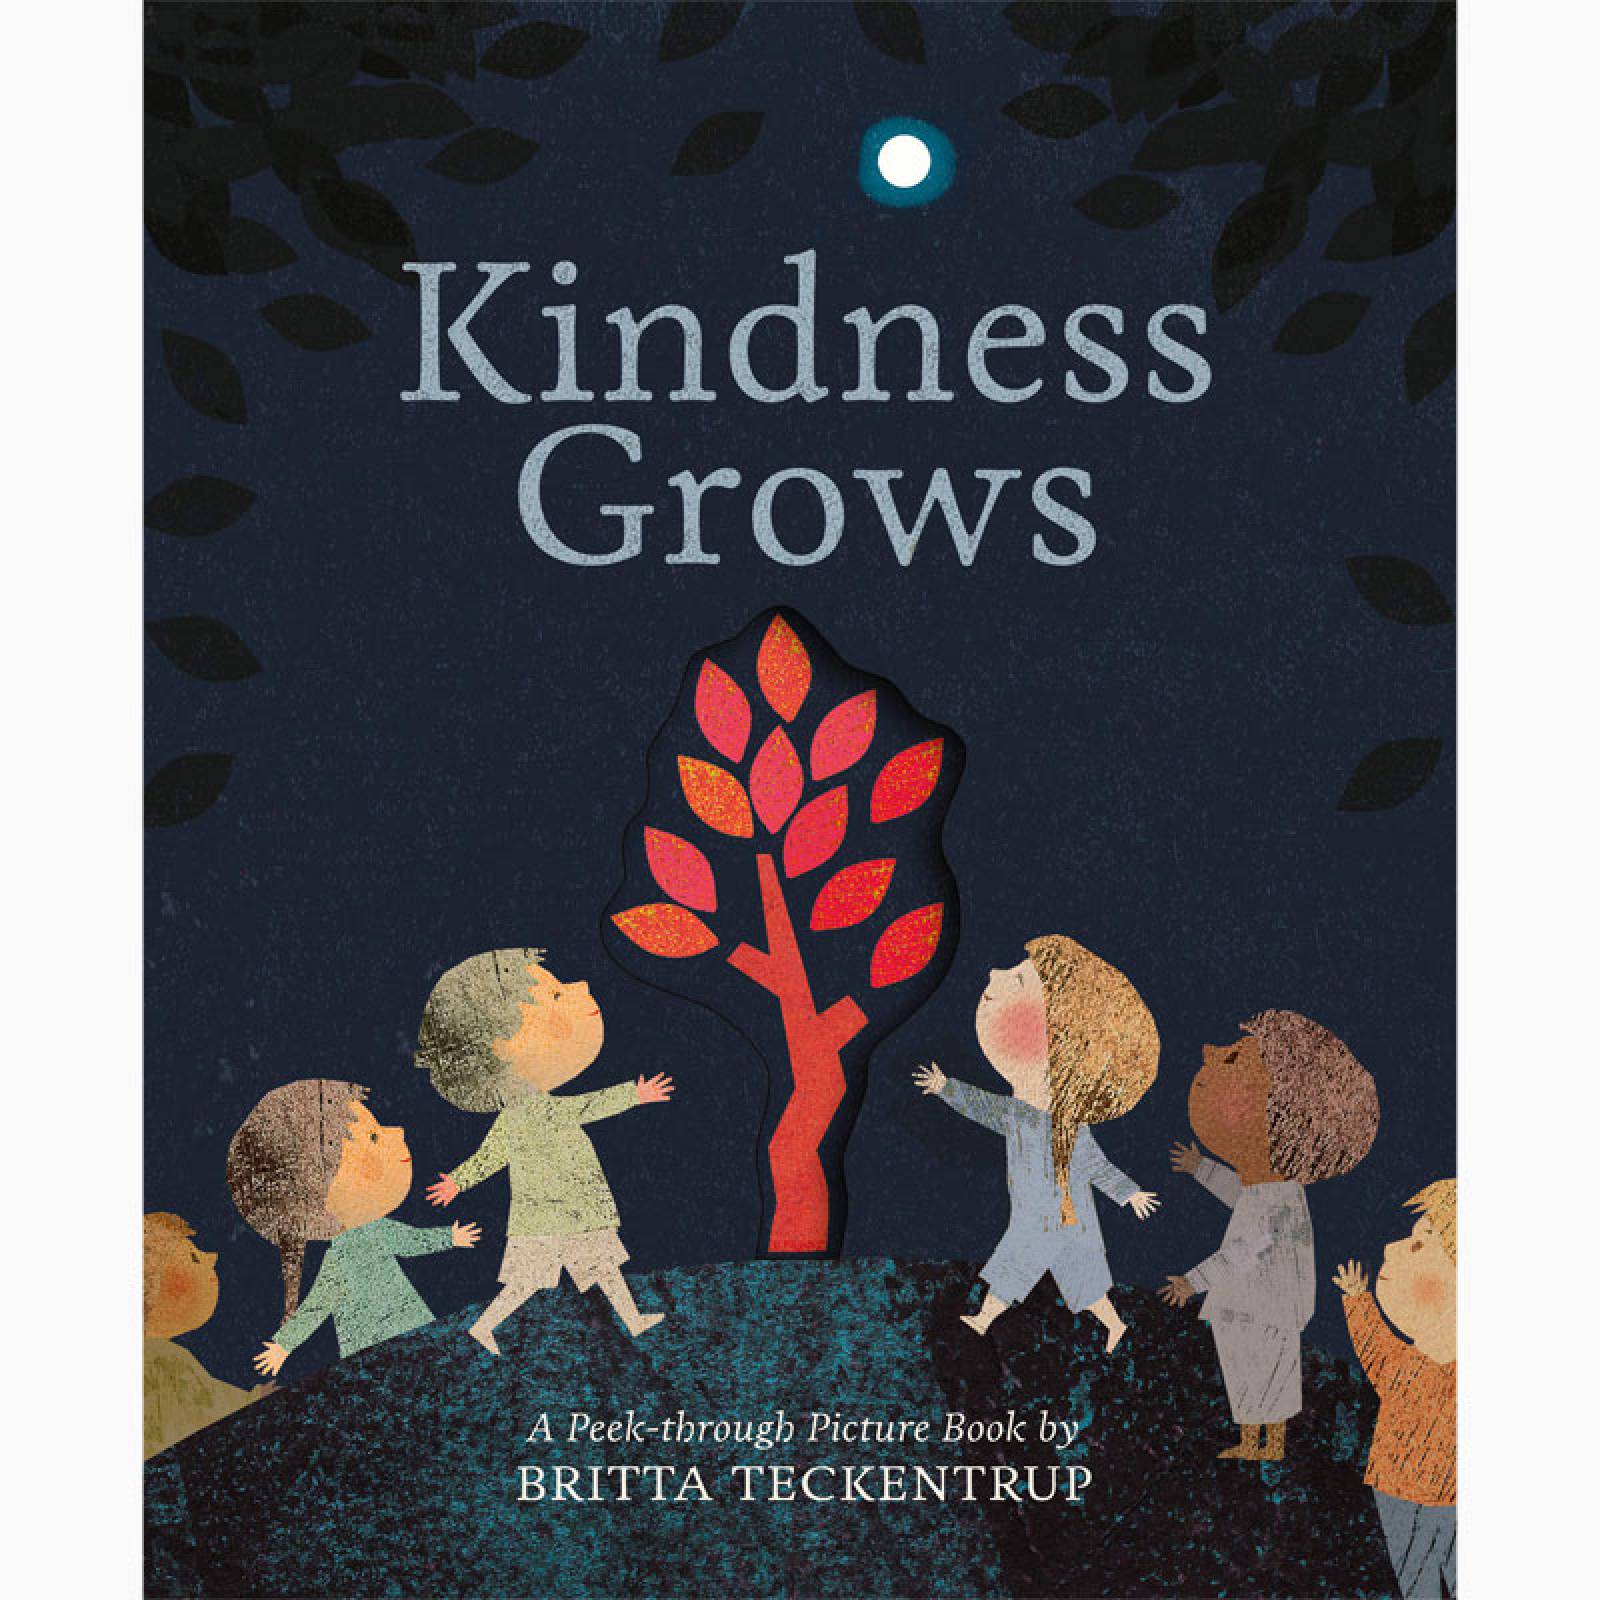 Kindness Grows: A Peek-through Picture Book